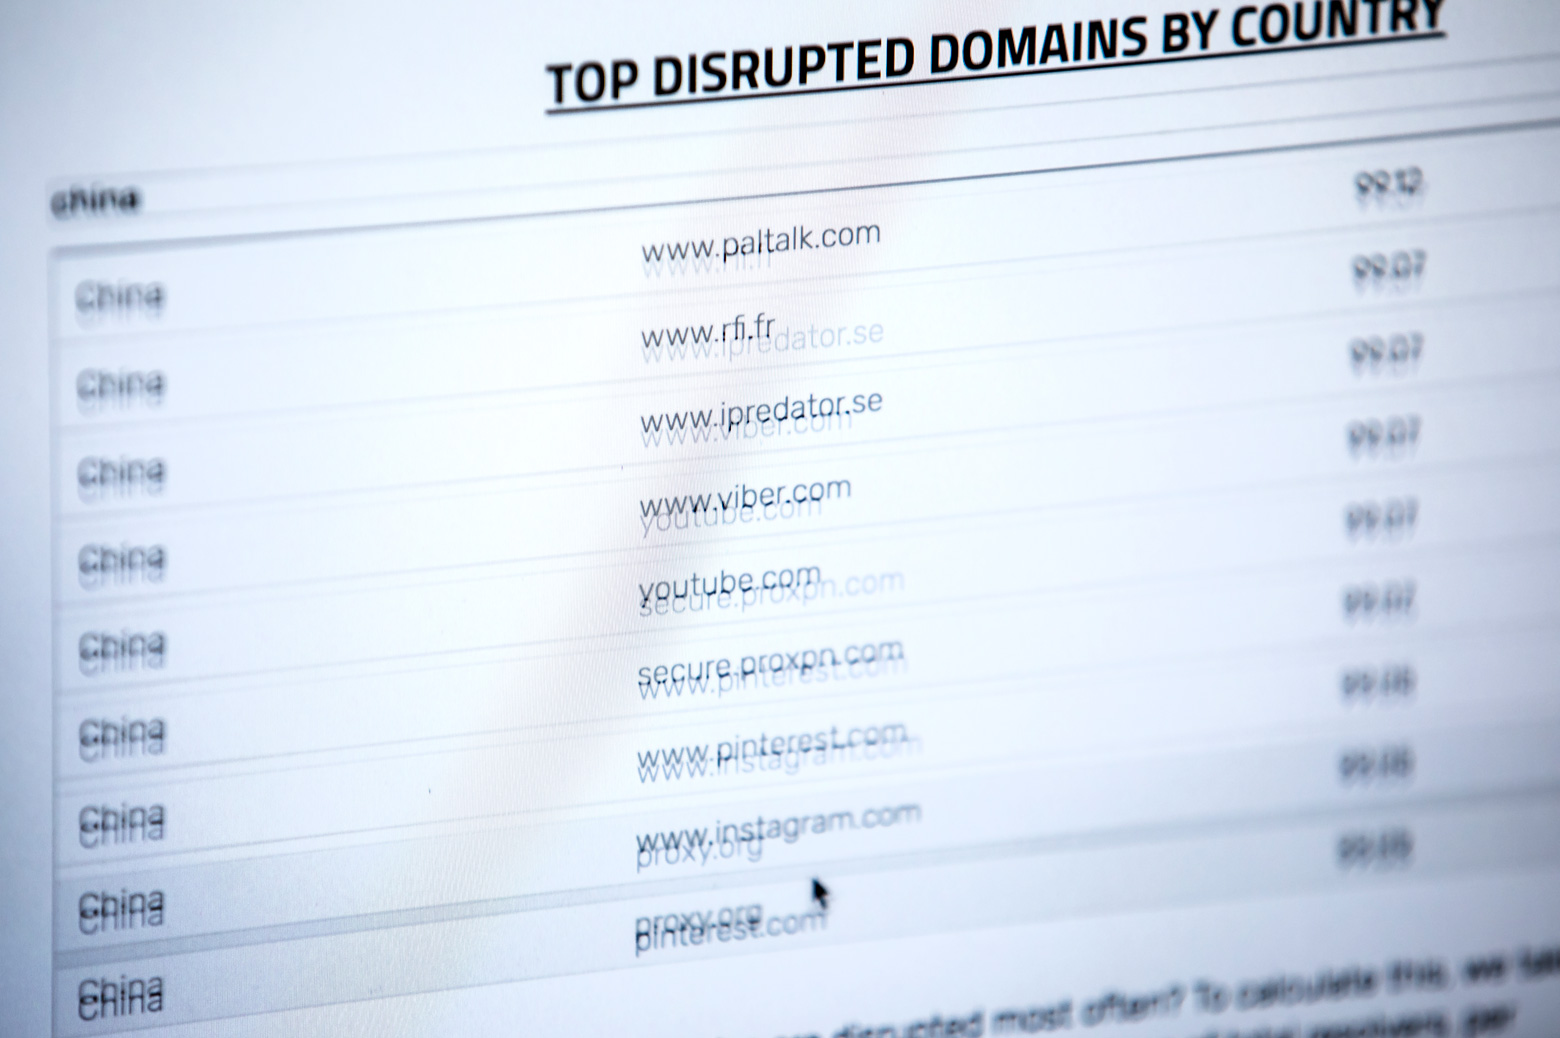 View of a computer screen listing disrupted domains